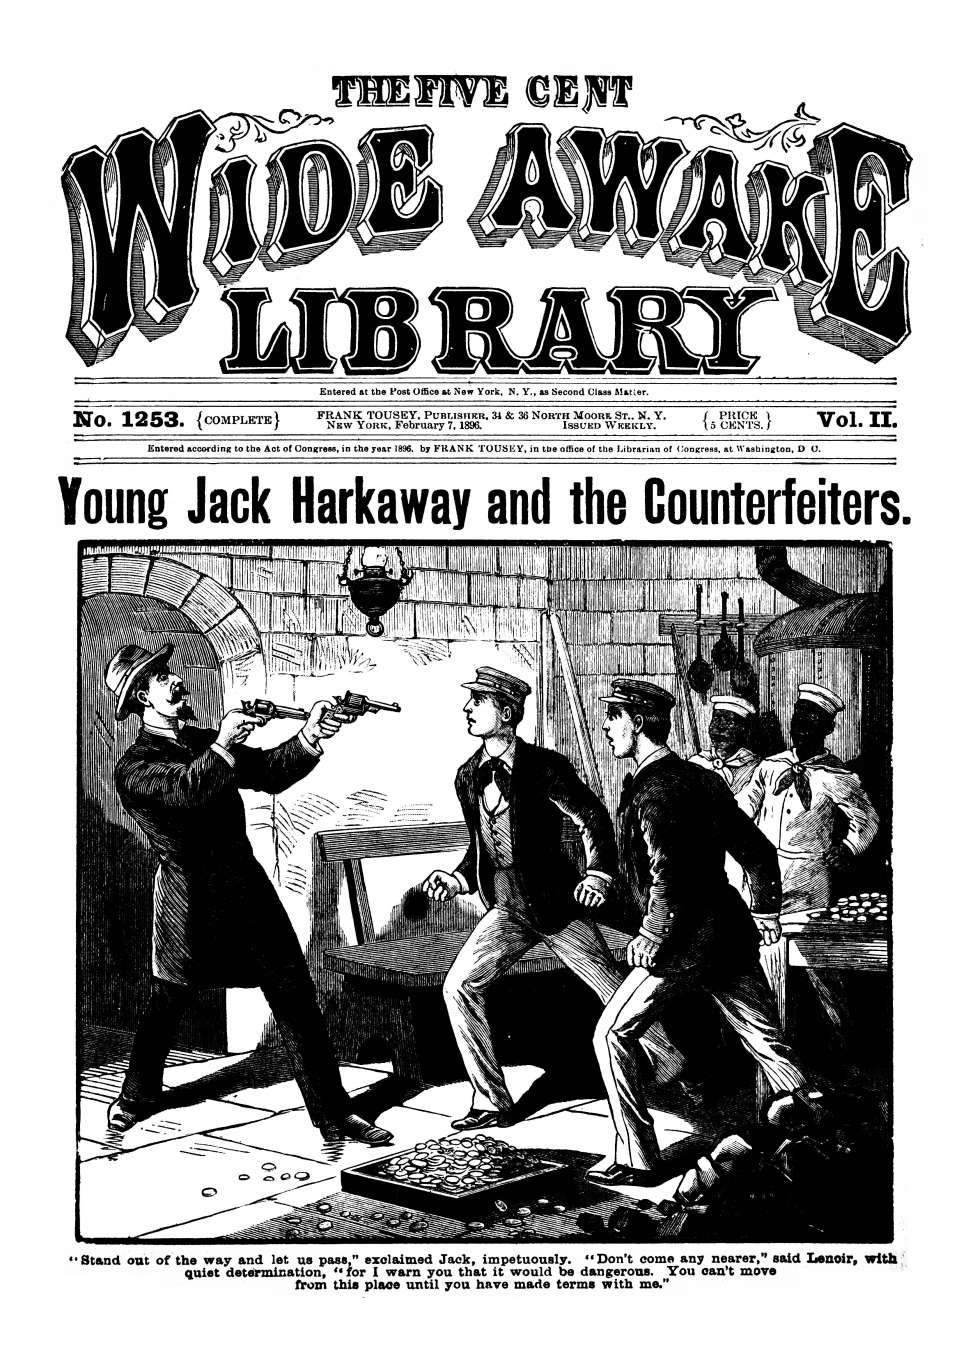 Book Cover For Five Cent Wide Awake Library v2 1253